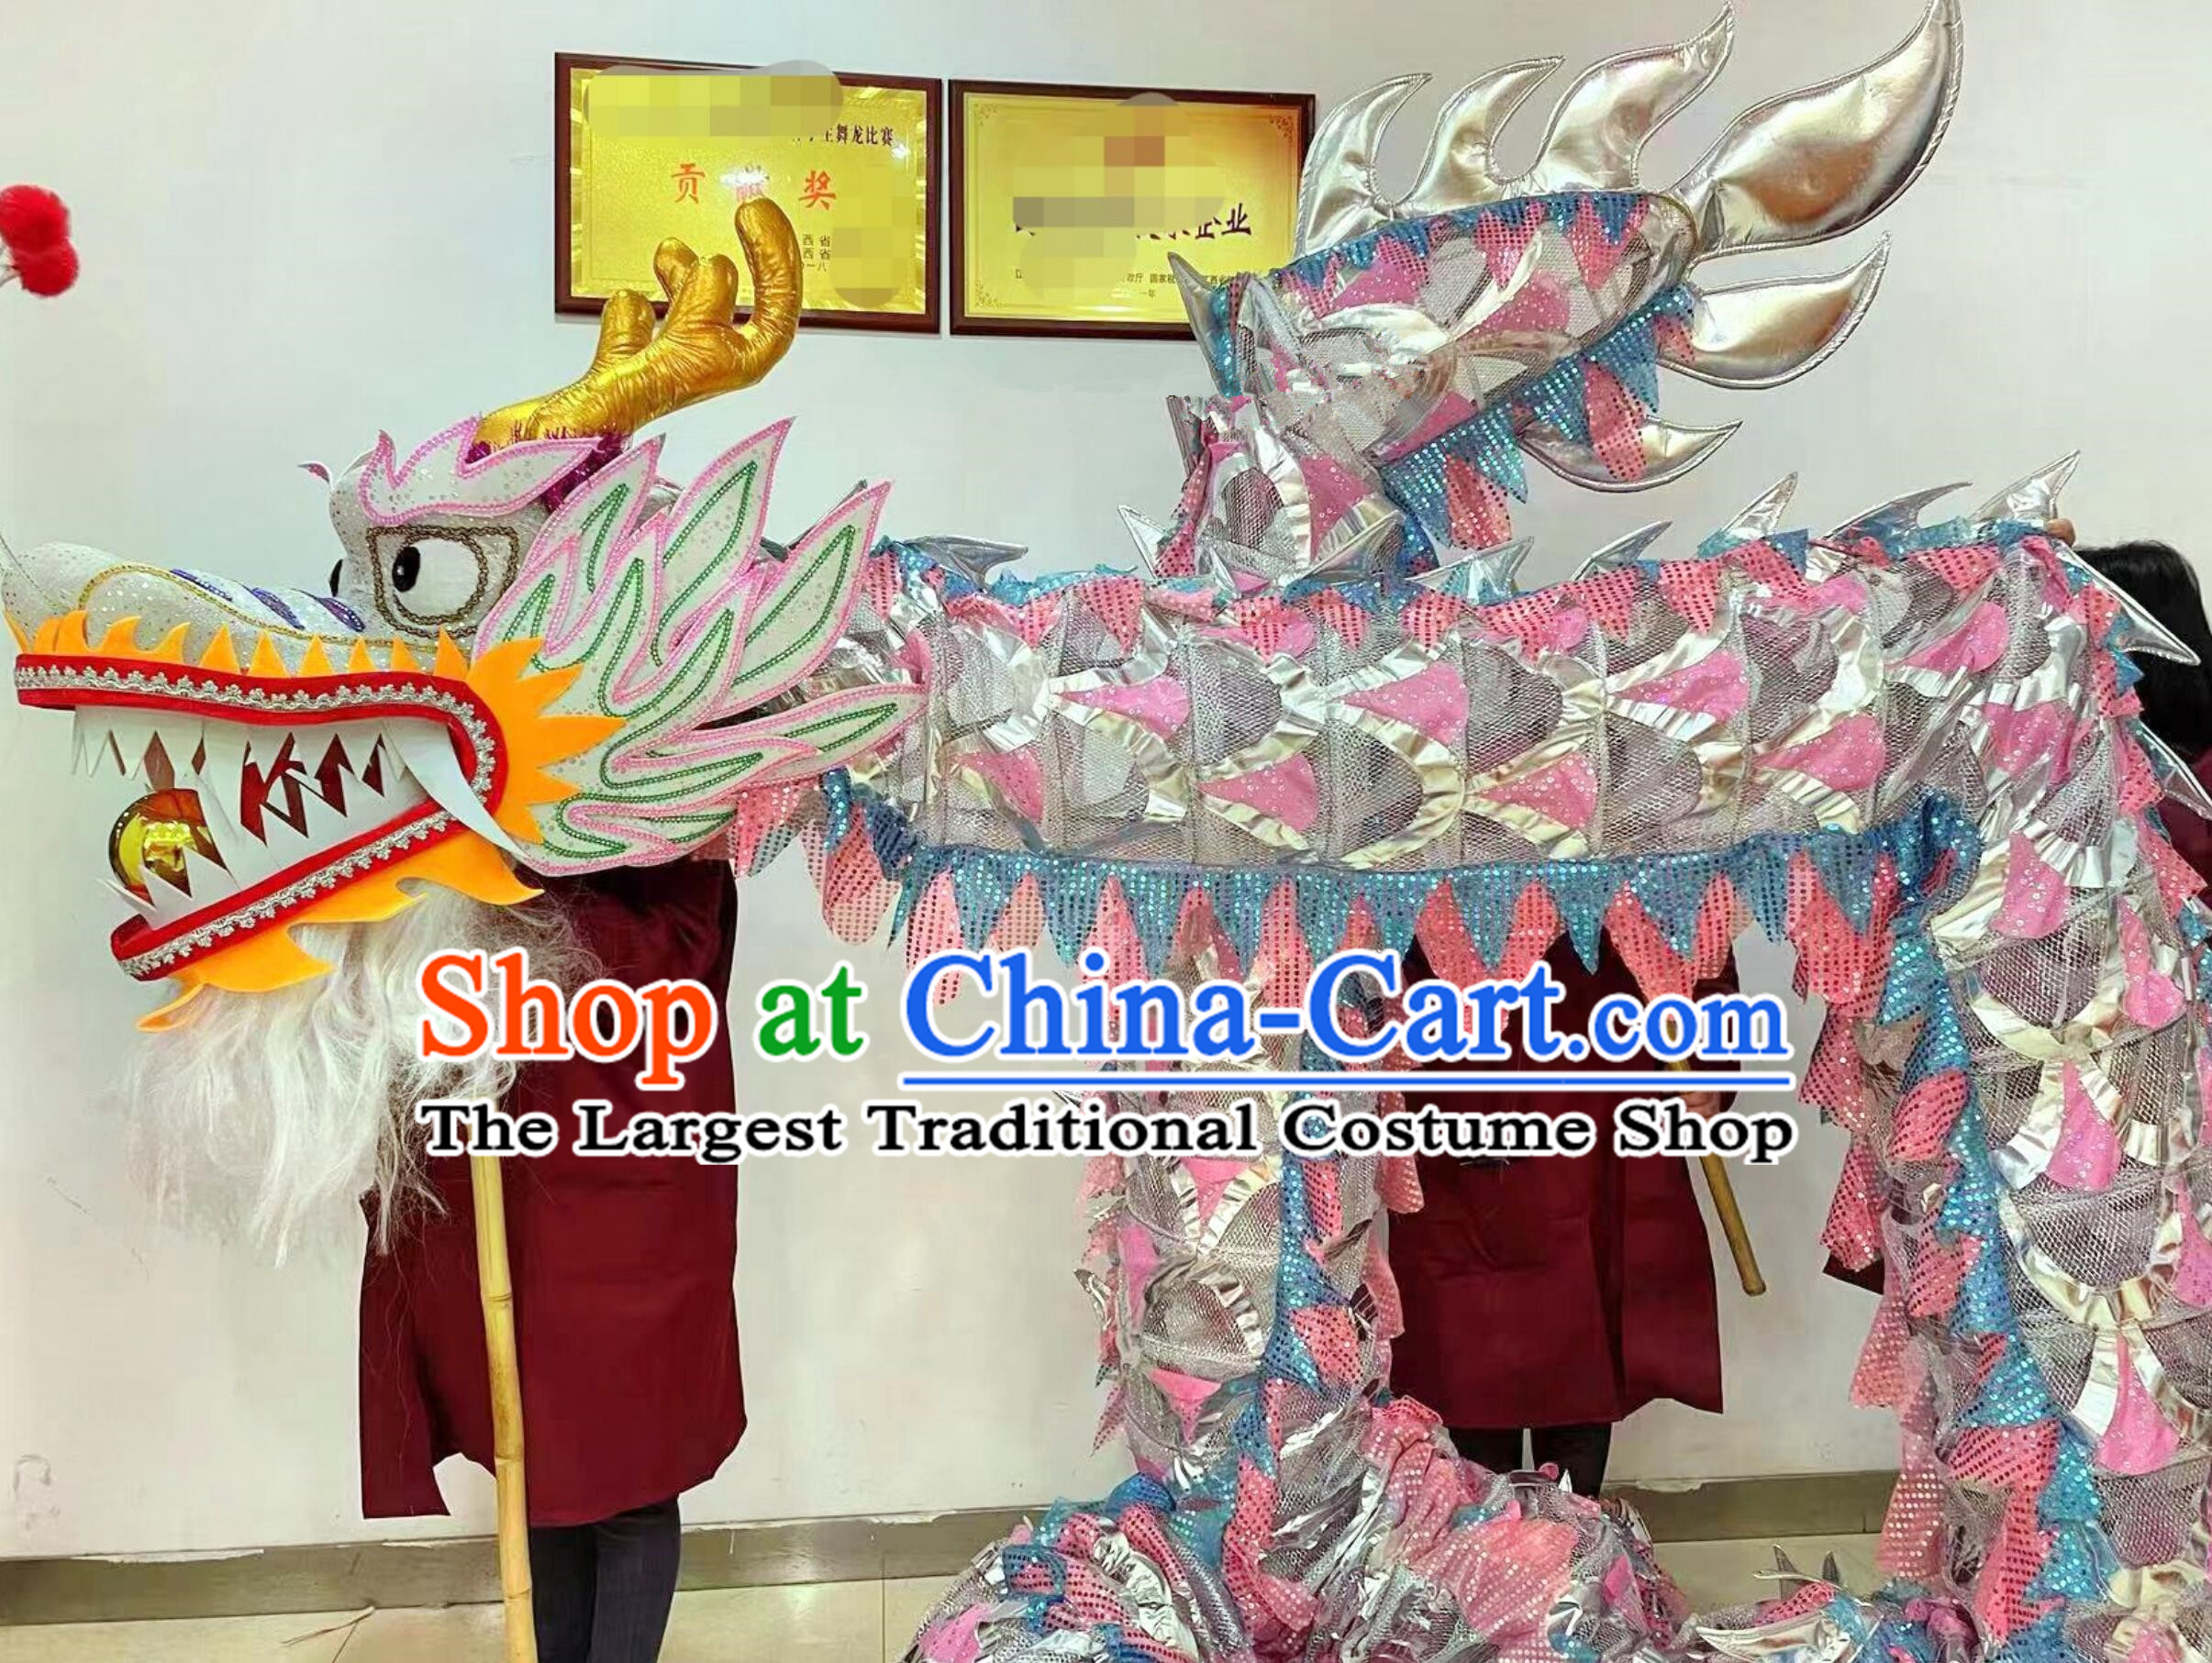 Pink Chinese Dragon Dance Net Costume Celebration Parade Dragon Costume Professional Competition Dragon Dancing Prop